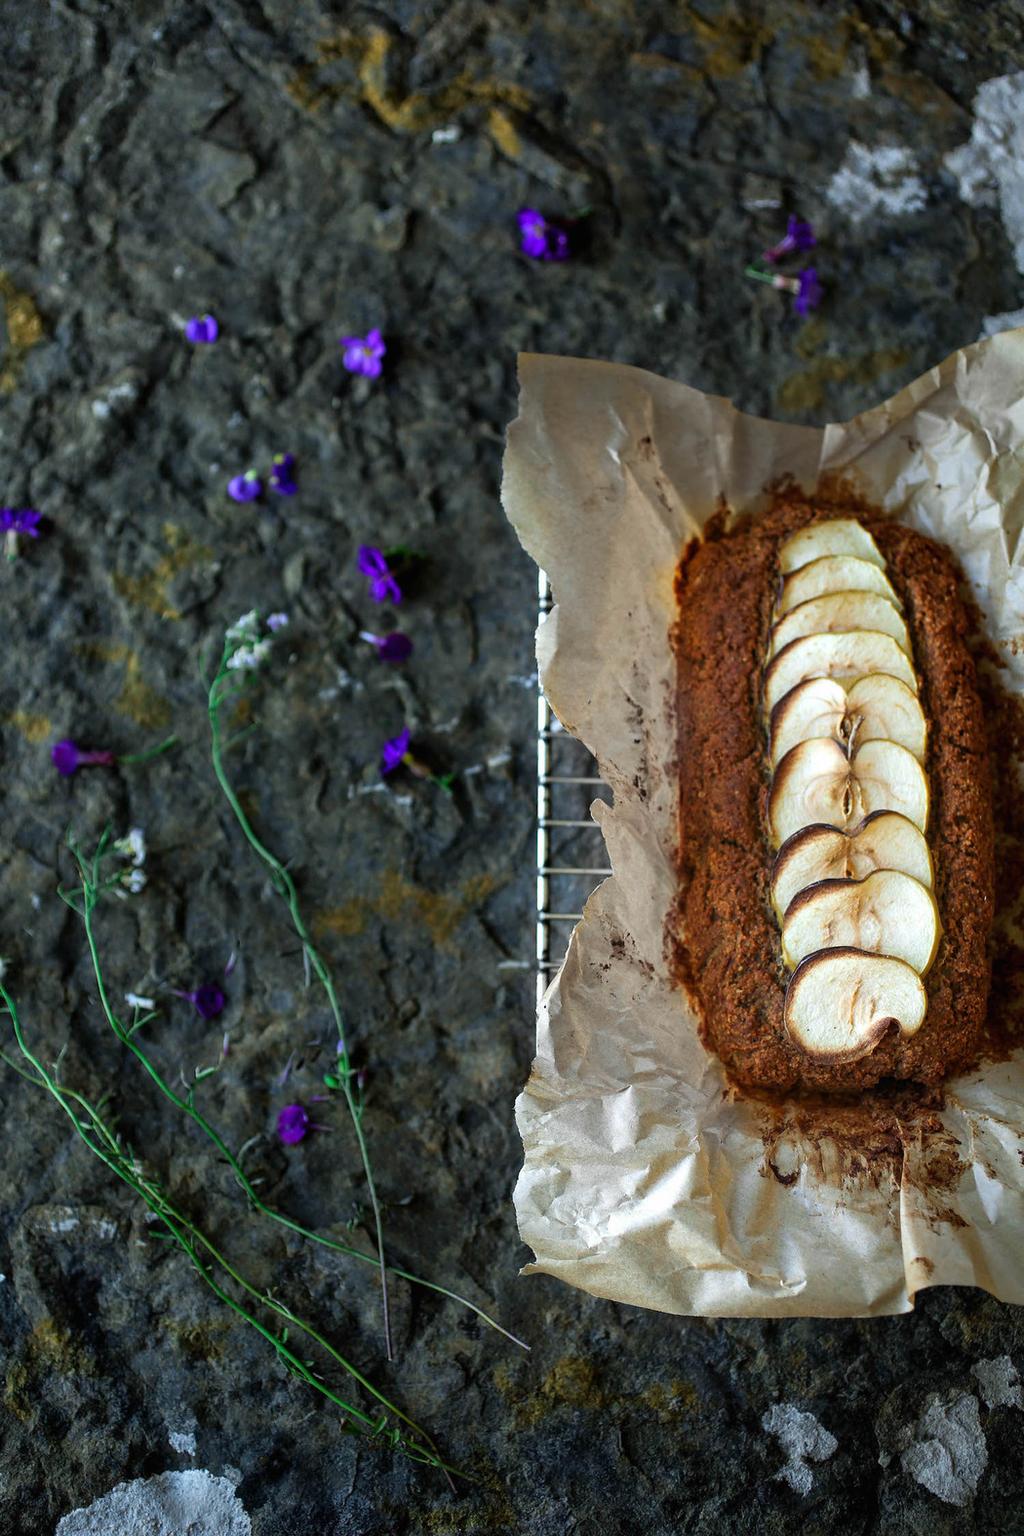 apple and fennel seed loaf 200g (2 cups) Porridge oats 100g (½ cup) Cornmeal 1 tsp. Baking powder 1 tsp.